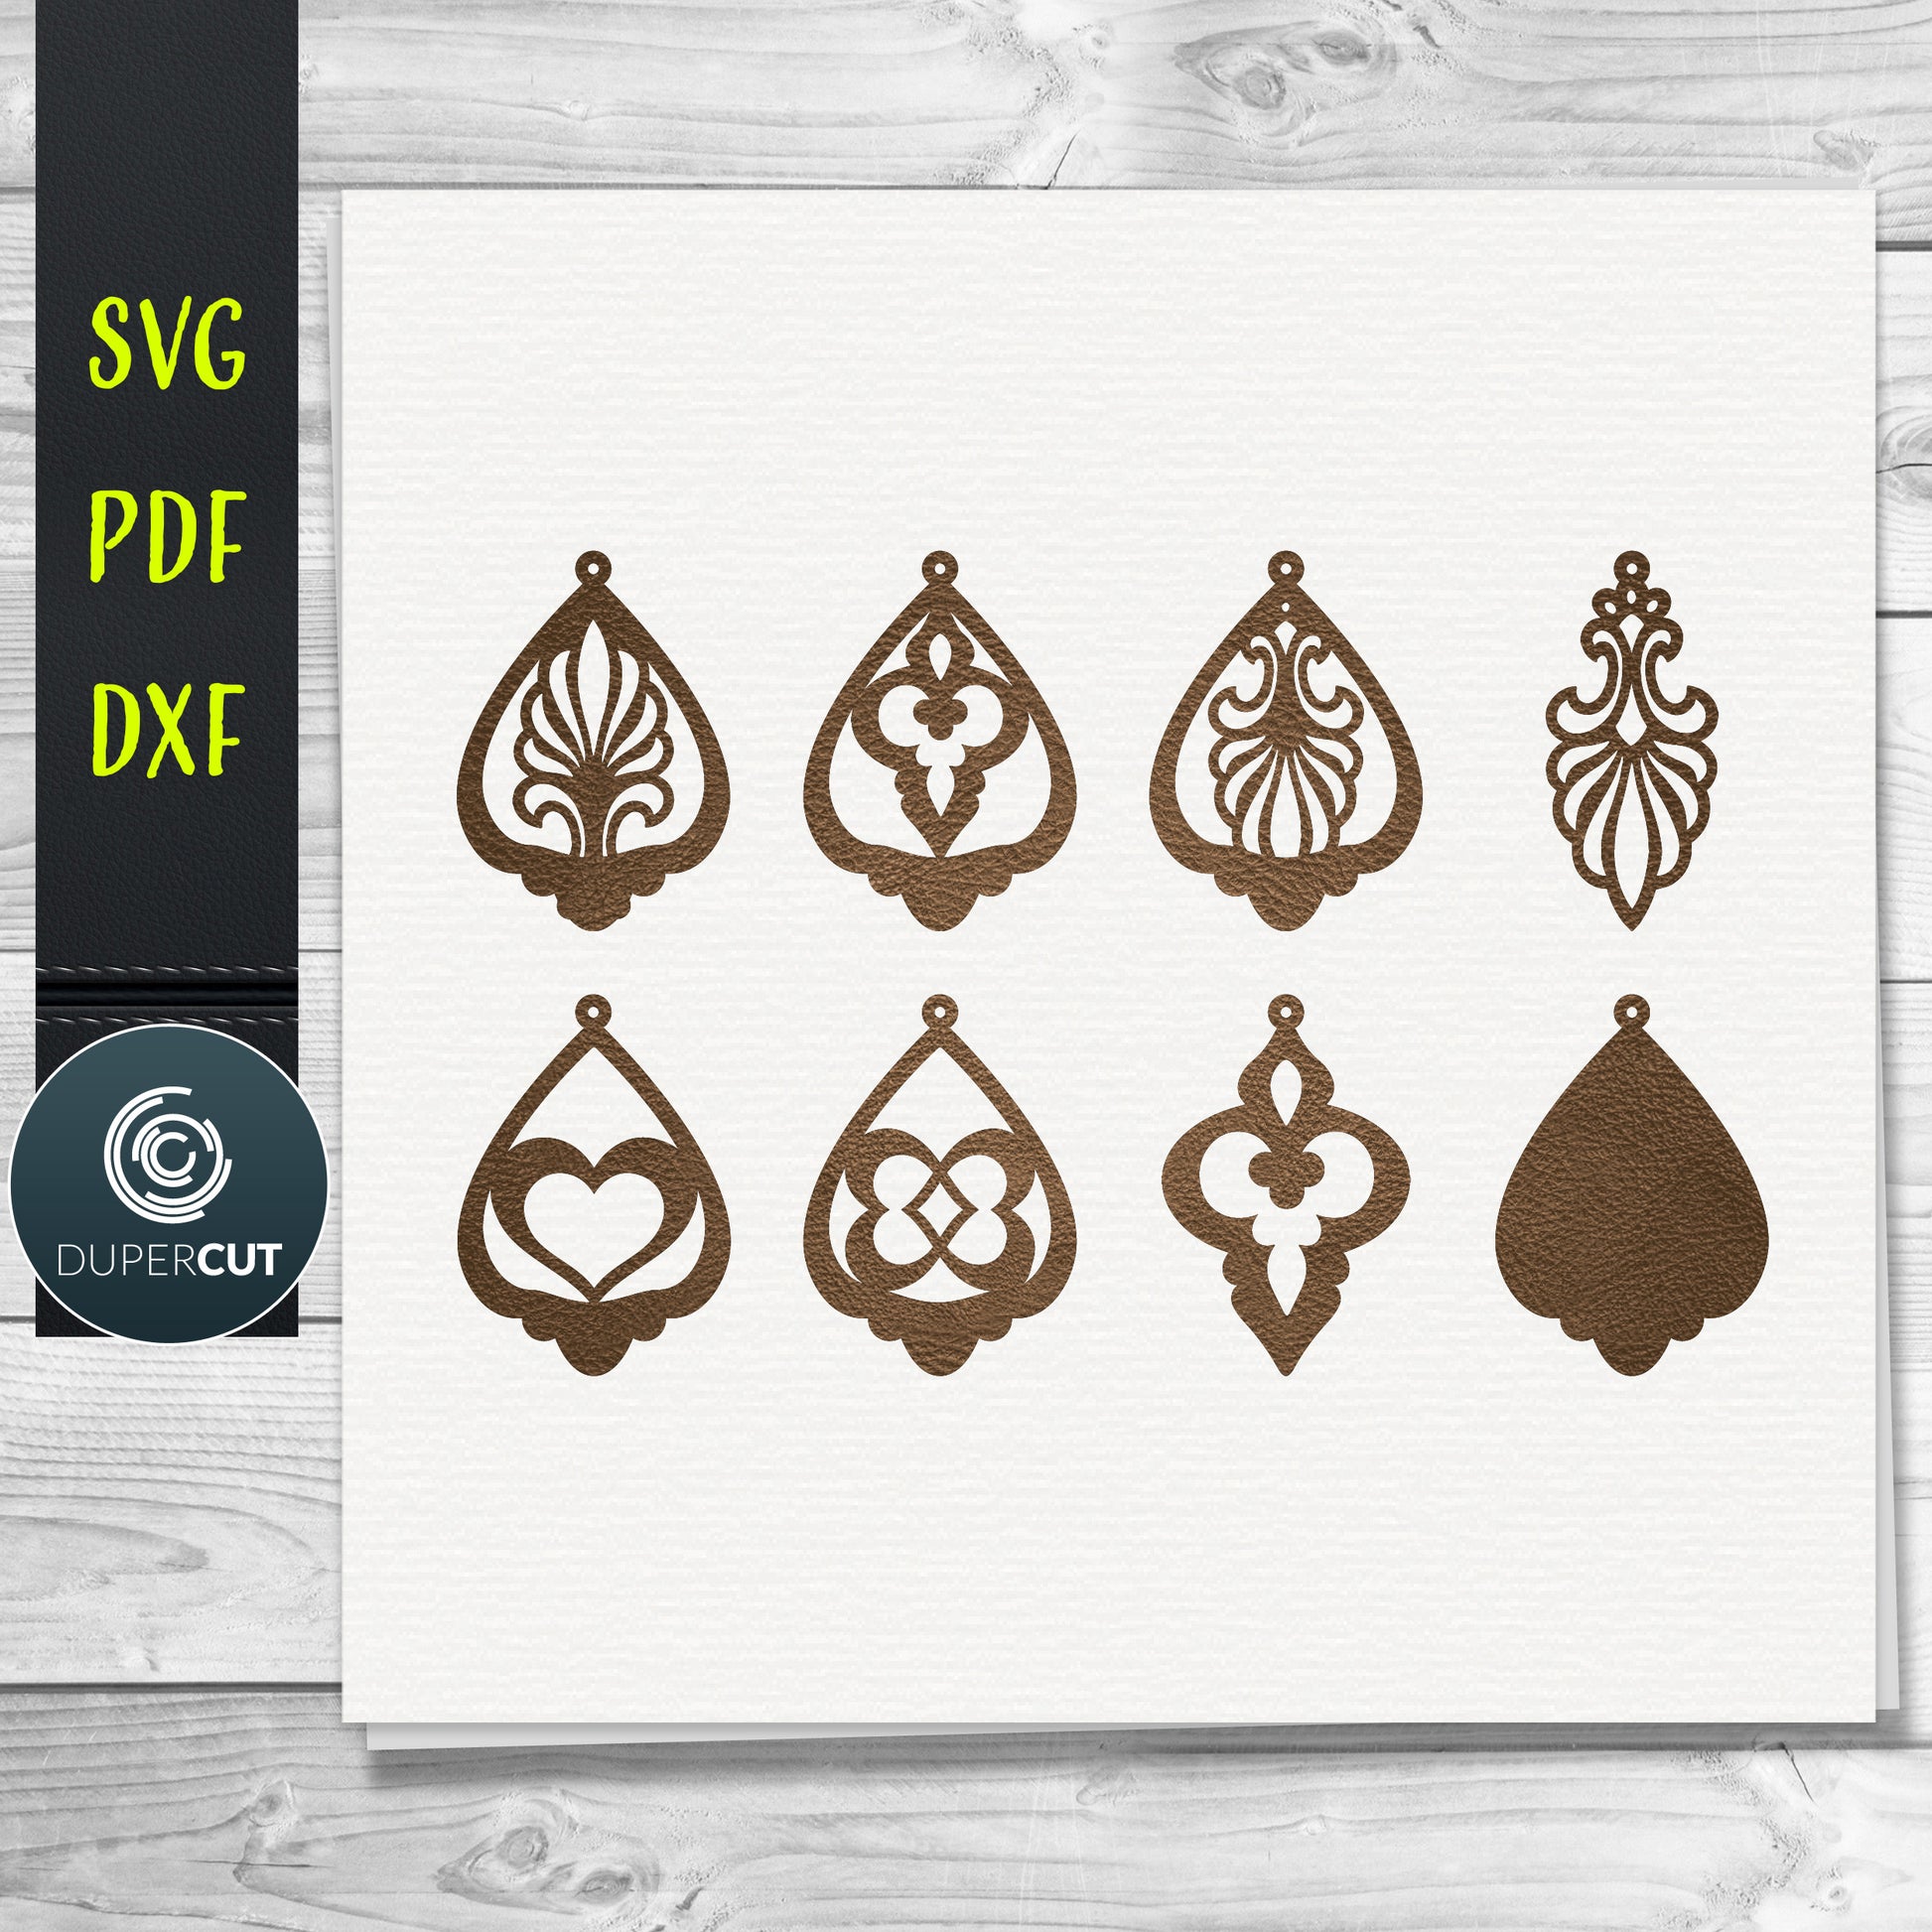 DIY Layered Leather Earrings for beginners SVG PDF DXF vector files. Jewellery making template for laser and cutting machines - Glowforge, Cricut, Silhouette Cameo.